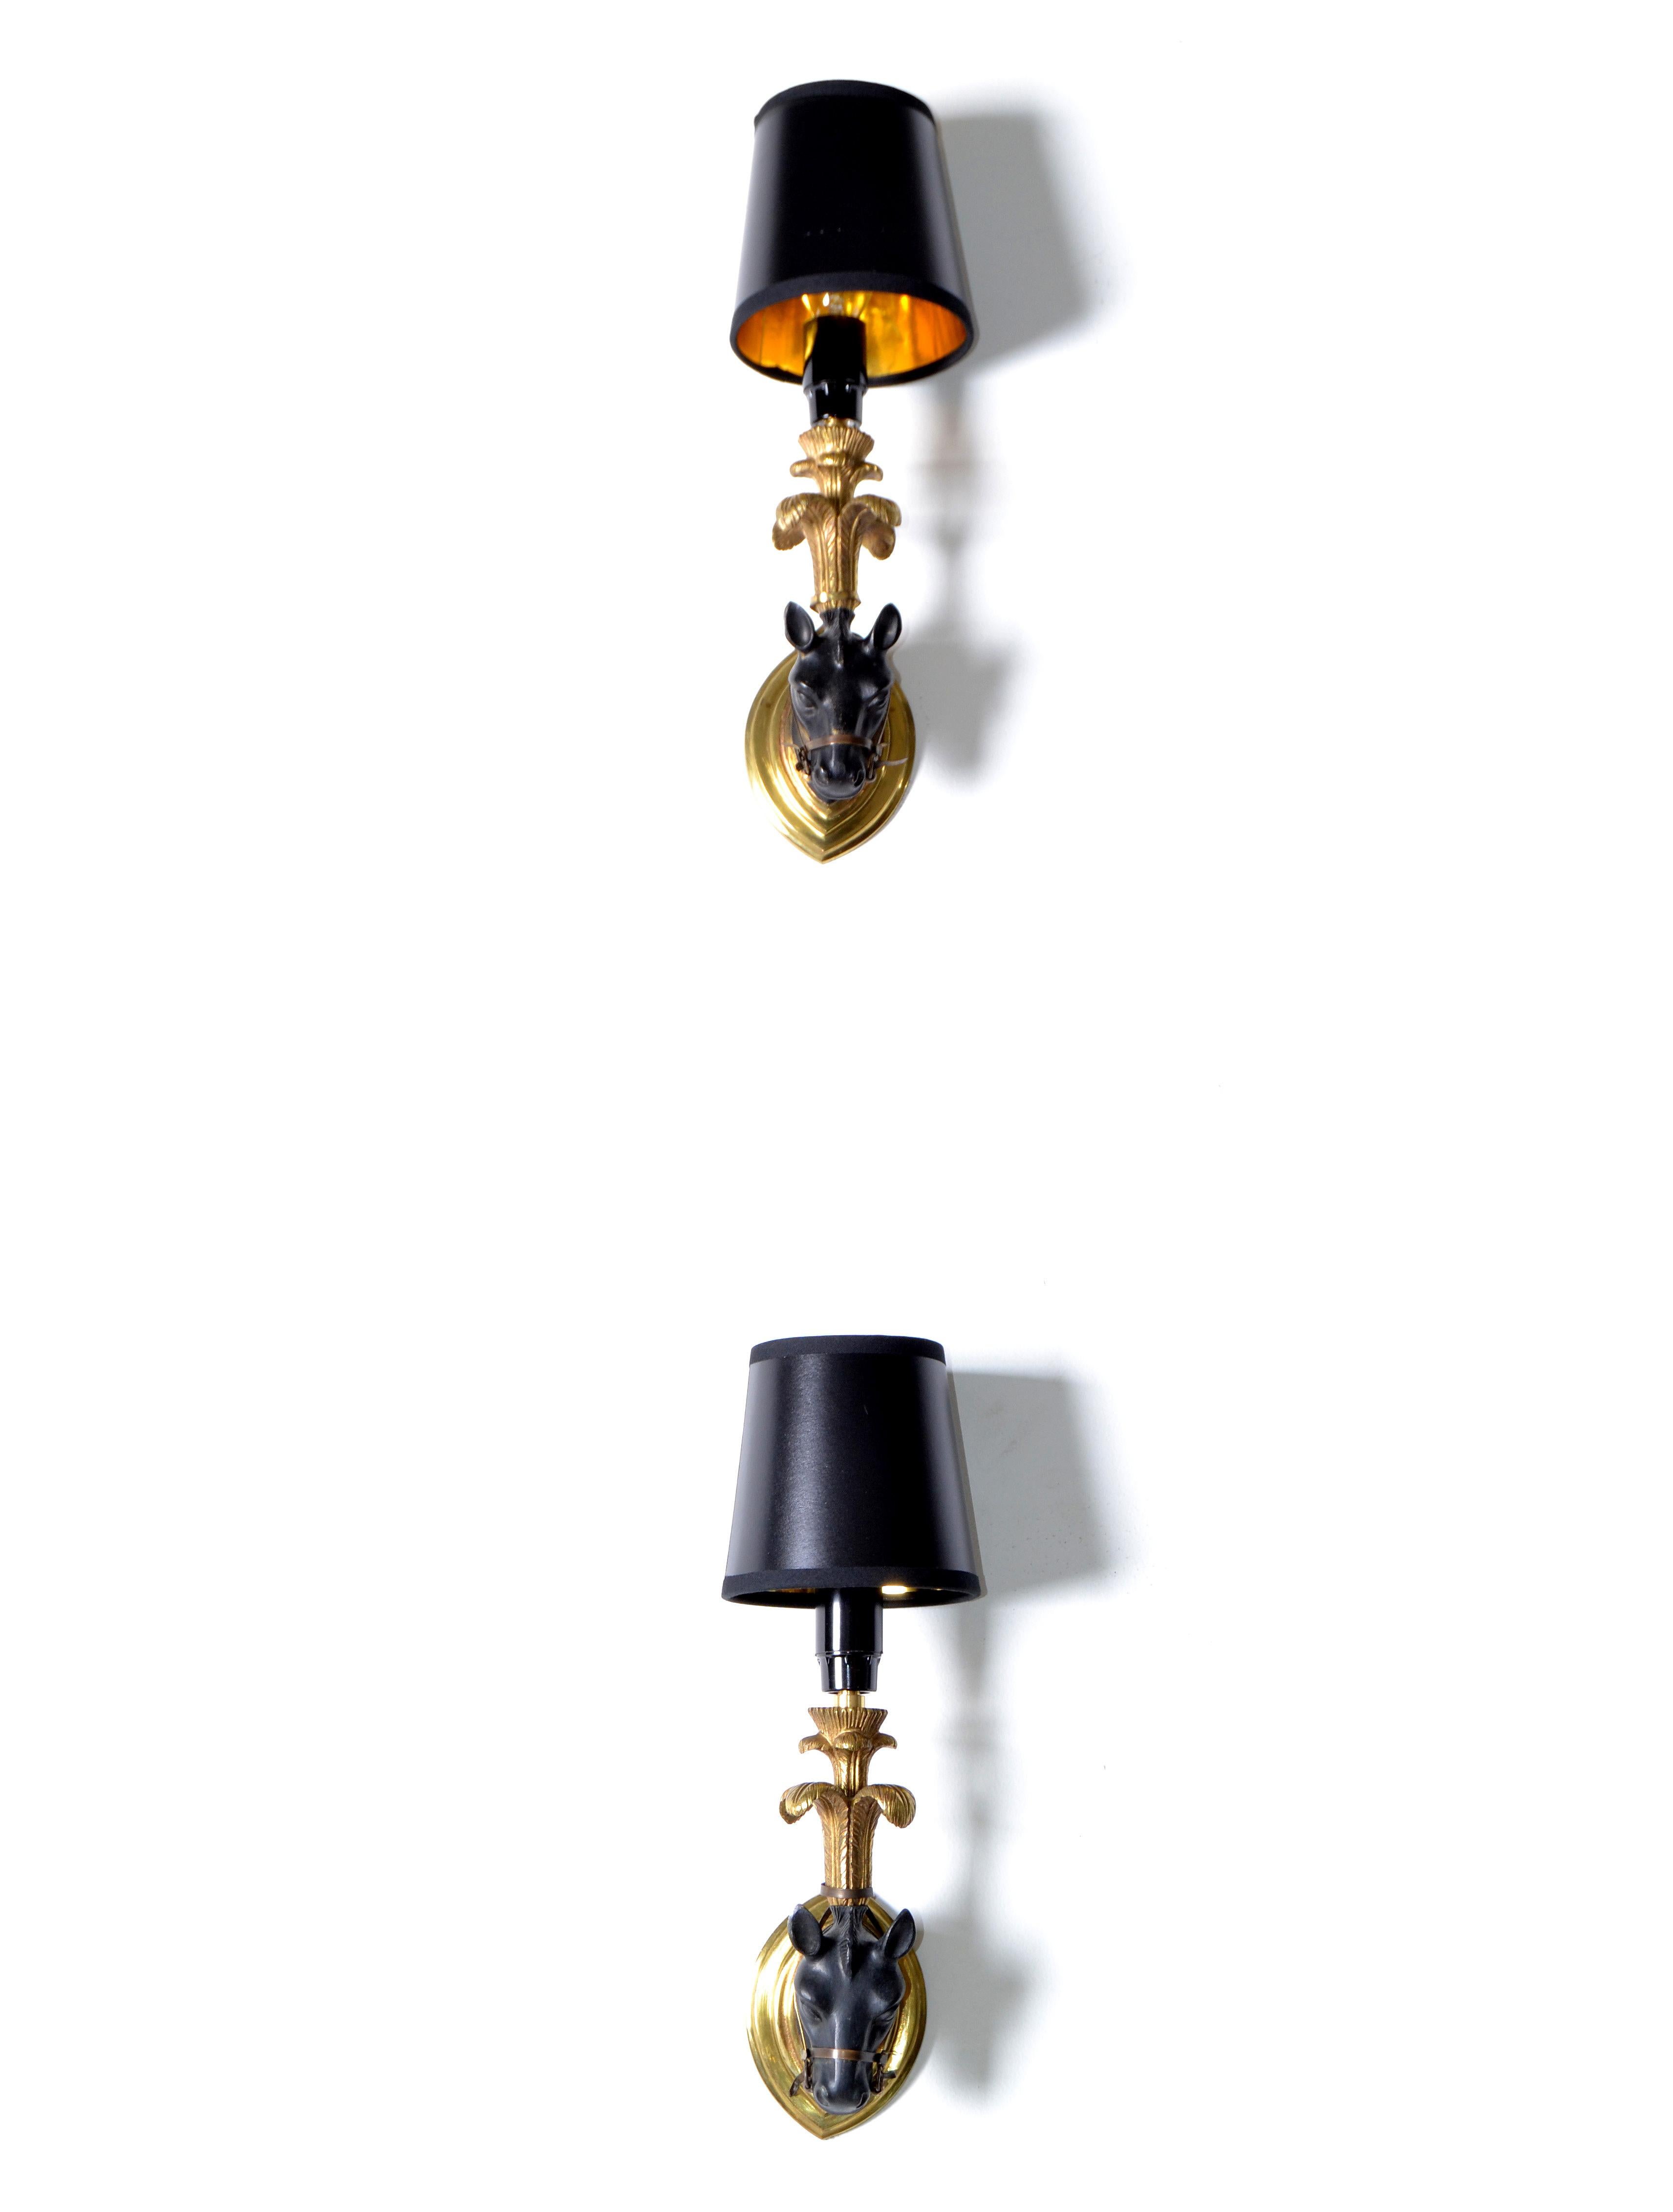 Enamel French Mid-Century Modern Black & Gold Bronze Horse Sconces, Wall Lights - Pair For Sale